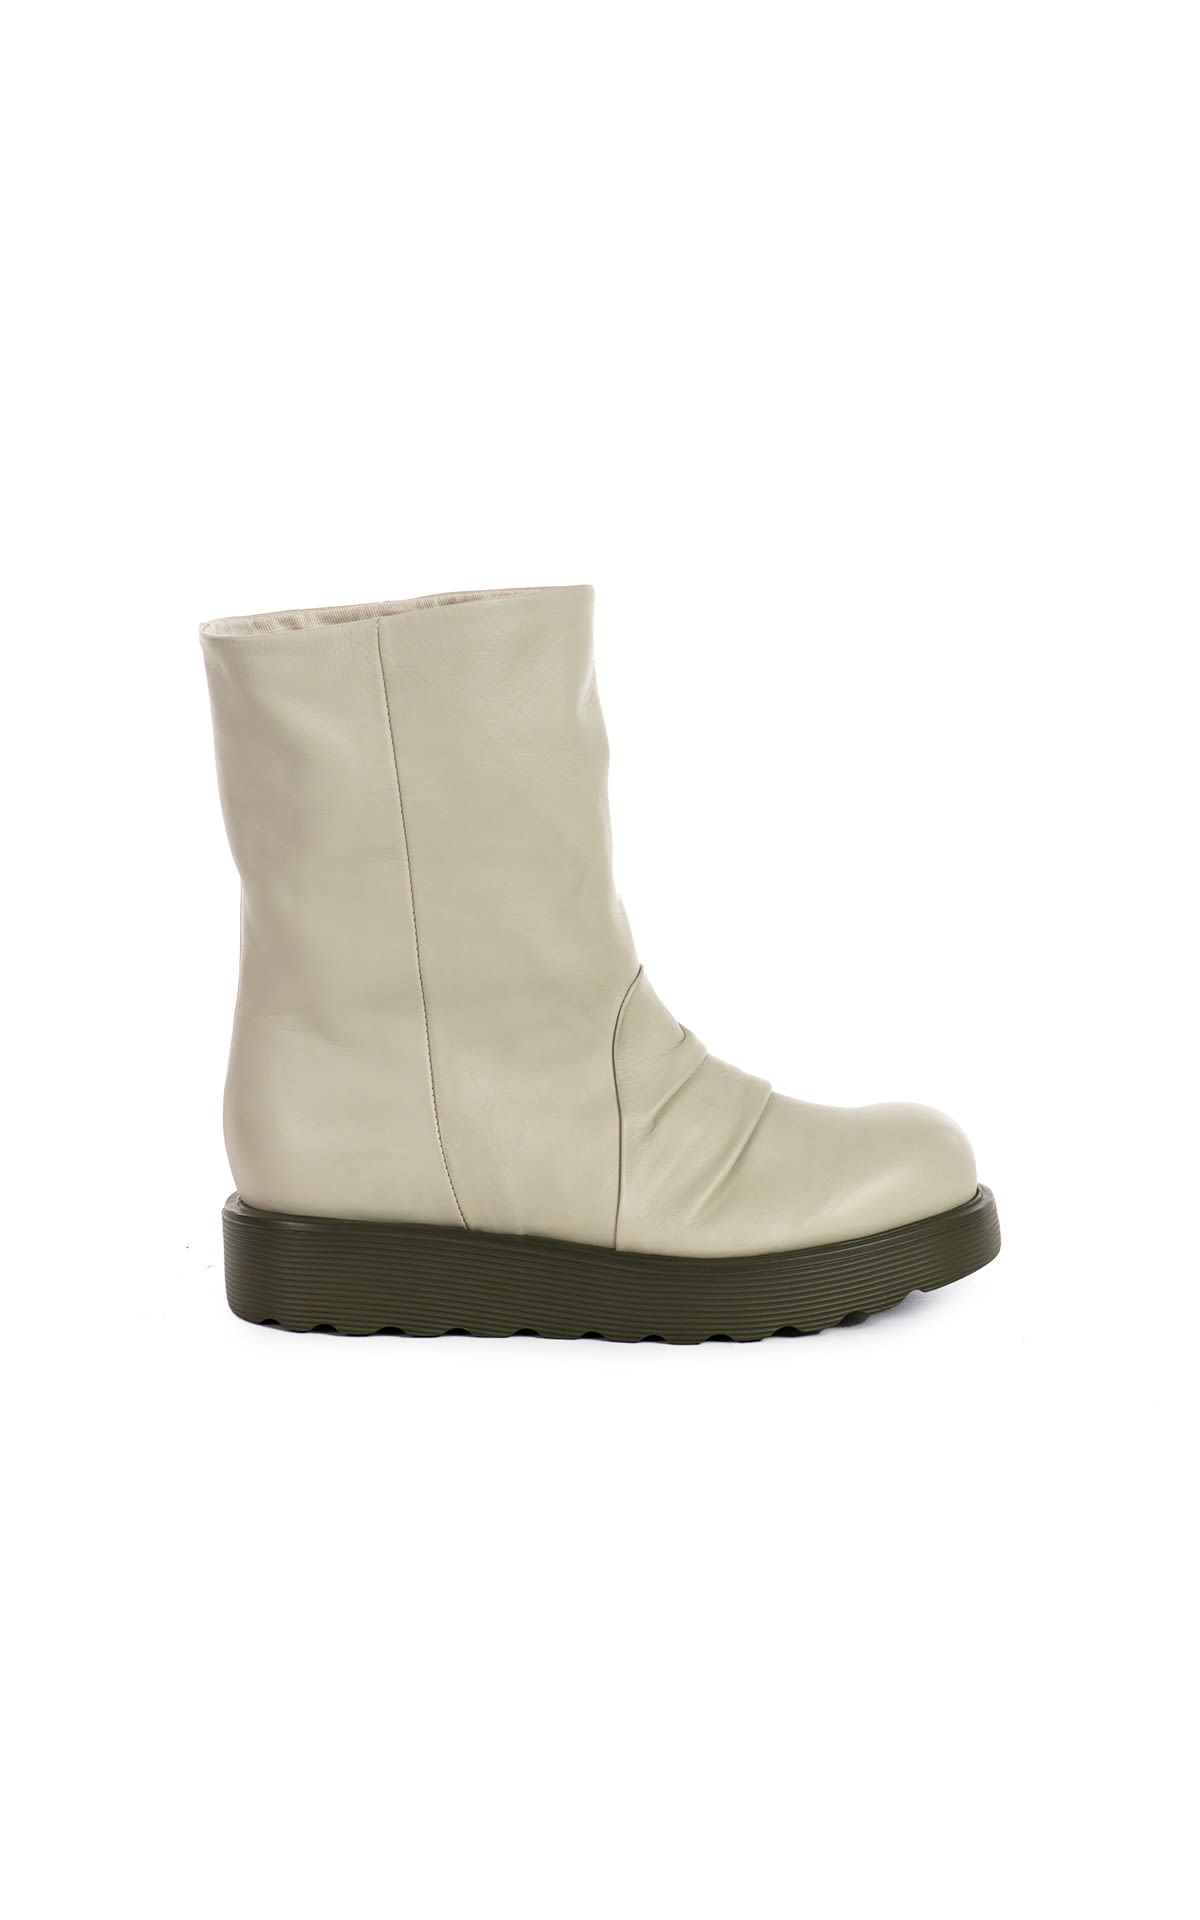 Ixos Sand leather ankle boot